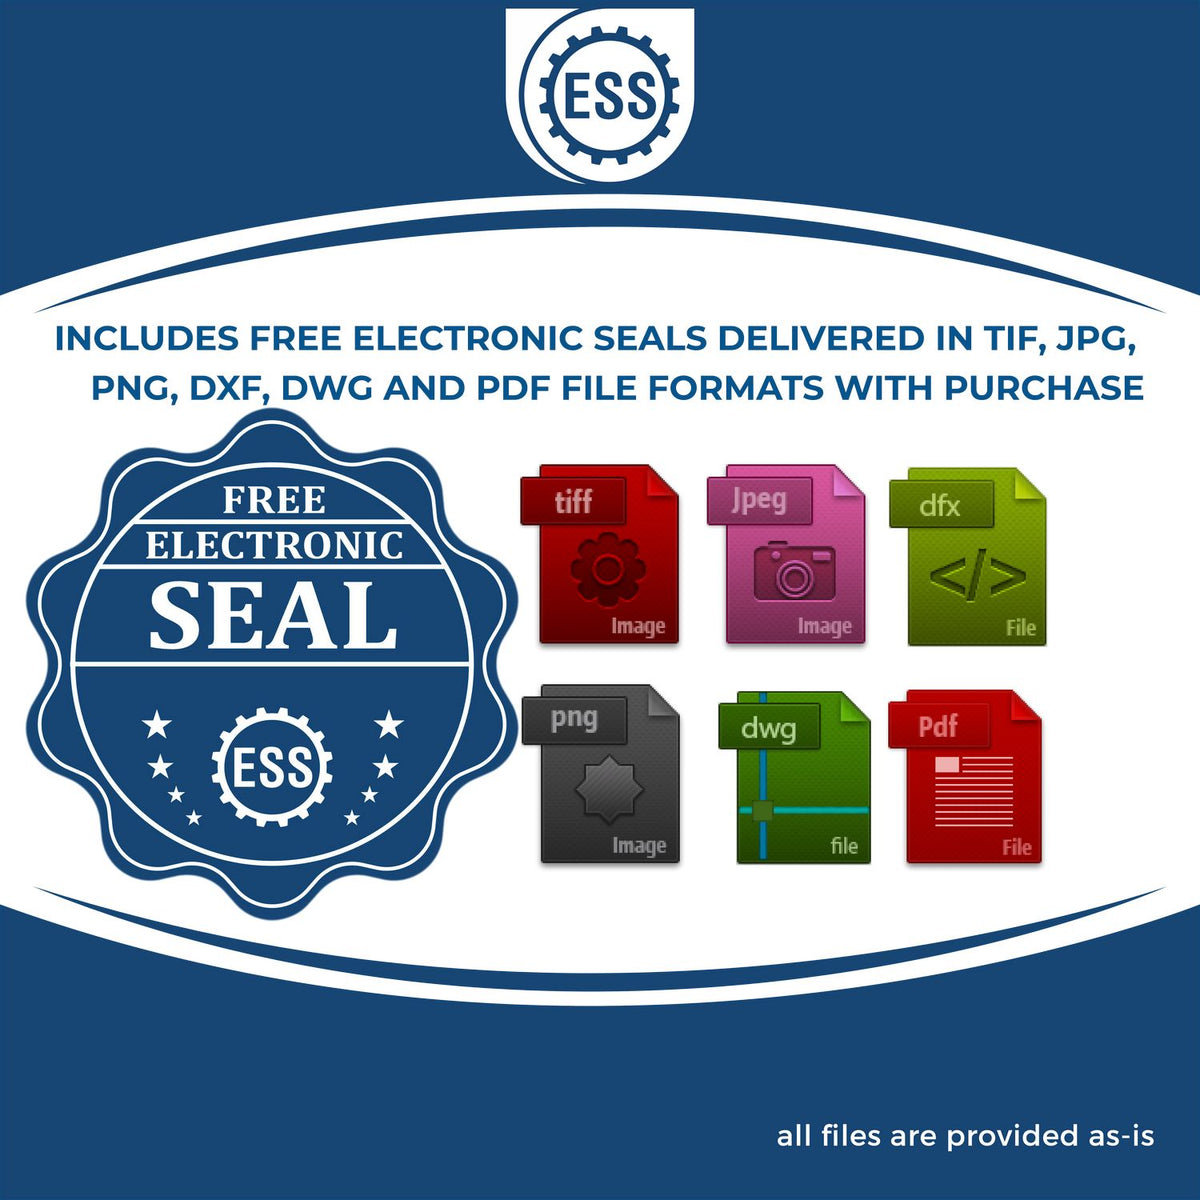 An infographic for the free electronic seal for the Heavy Duty Cast Iron Maine Architect Embosser illustrating the different file type icons such as DXF, DWG, TIF, JPG and PNG.